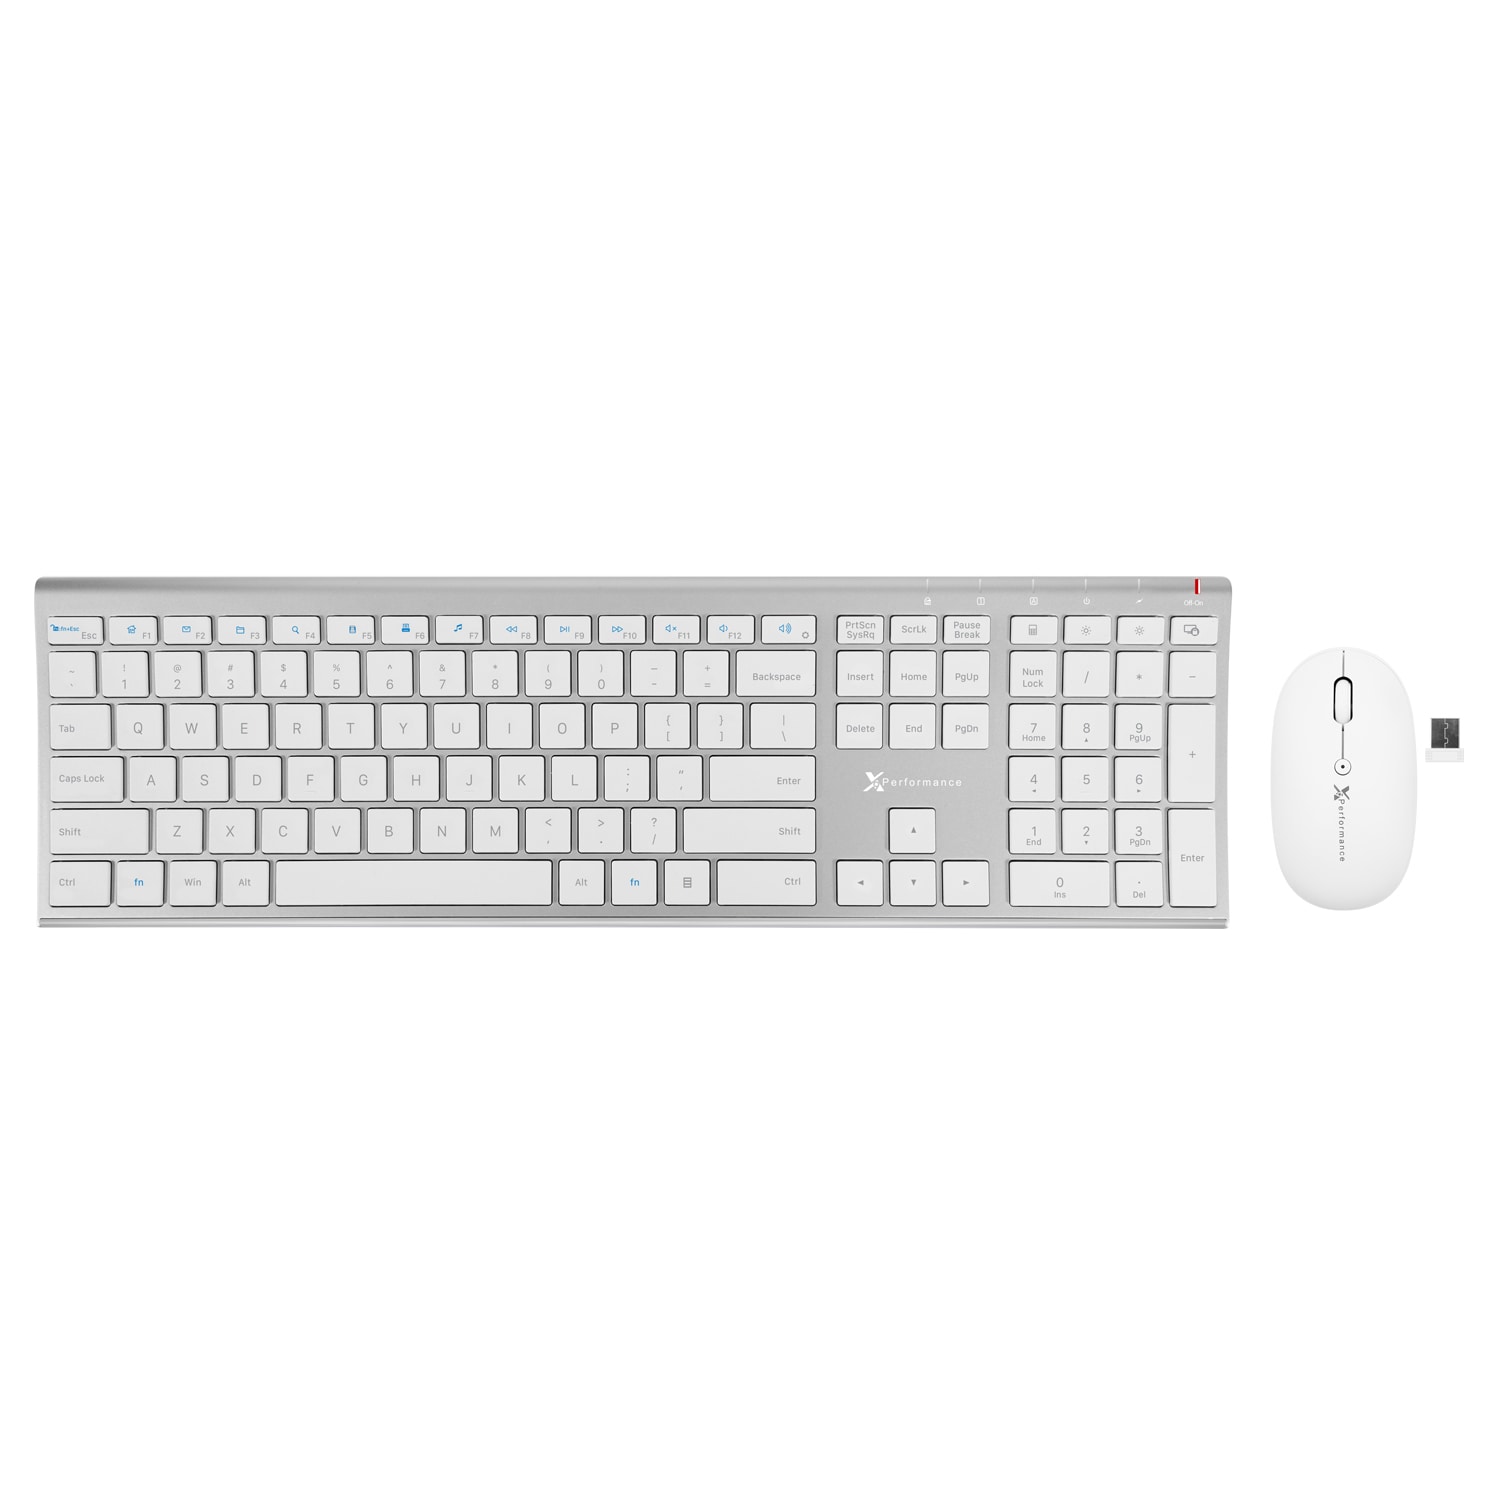 Wireless Keyboard And Mouse Rechargeable Full-size 2400 Dpi